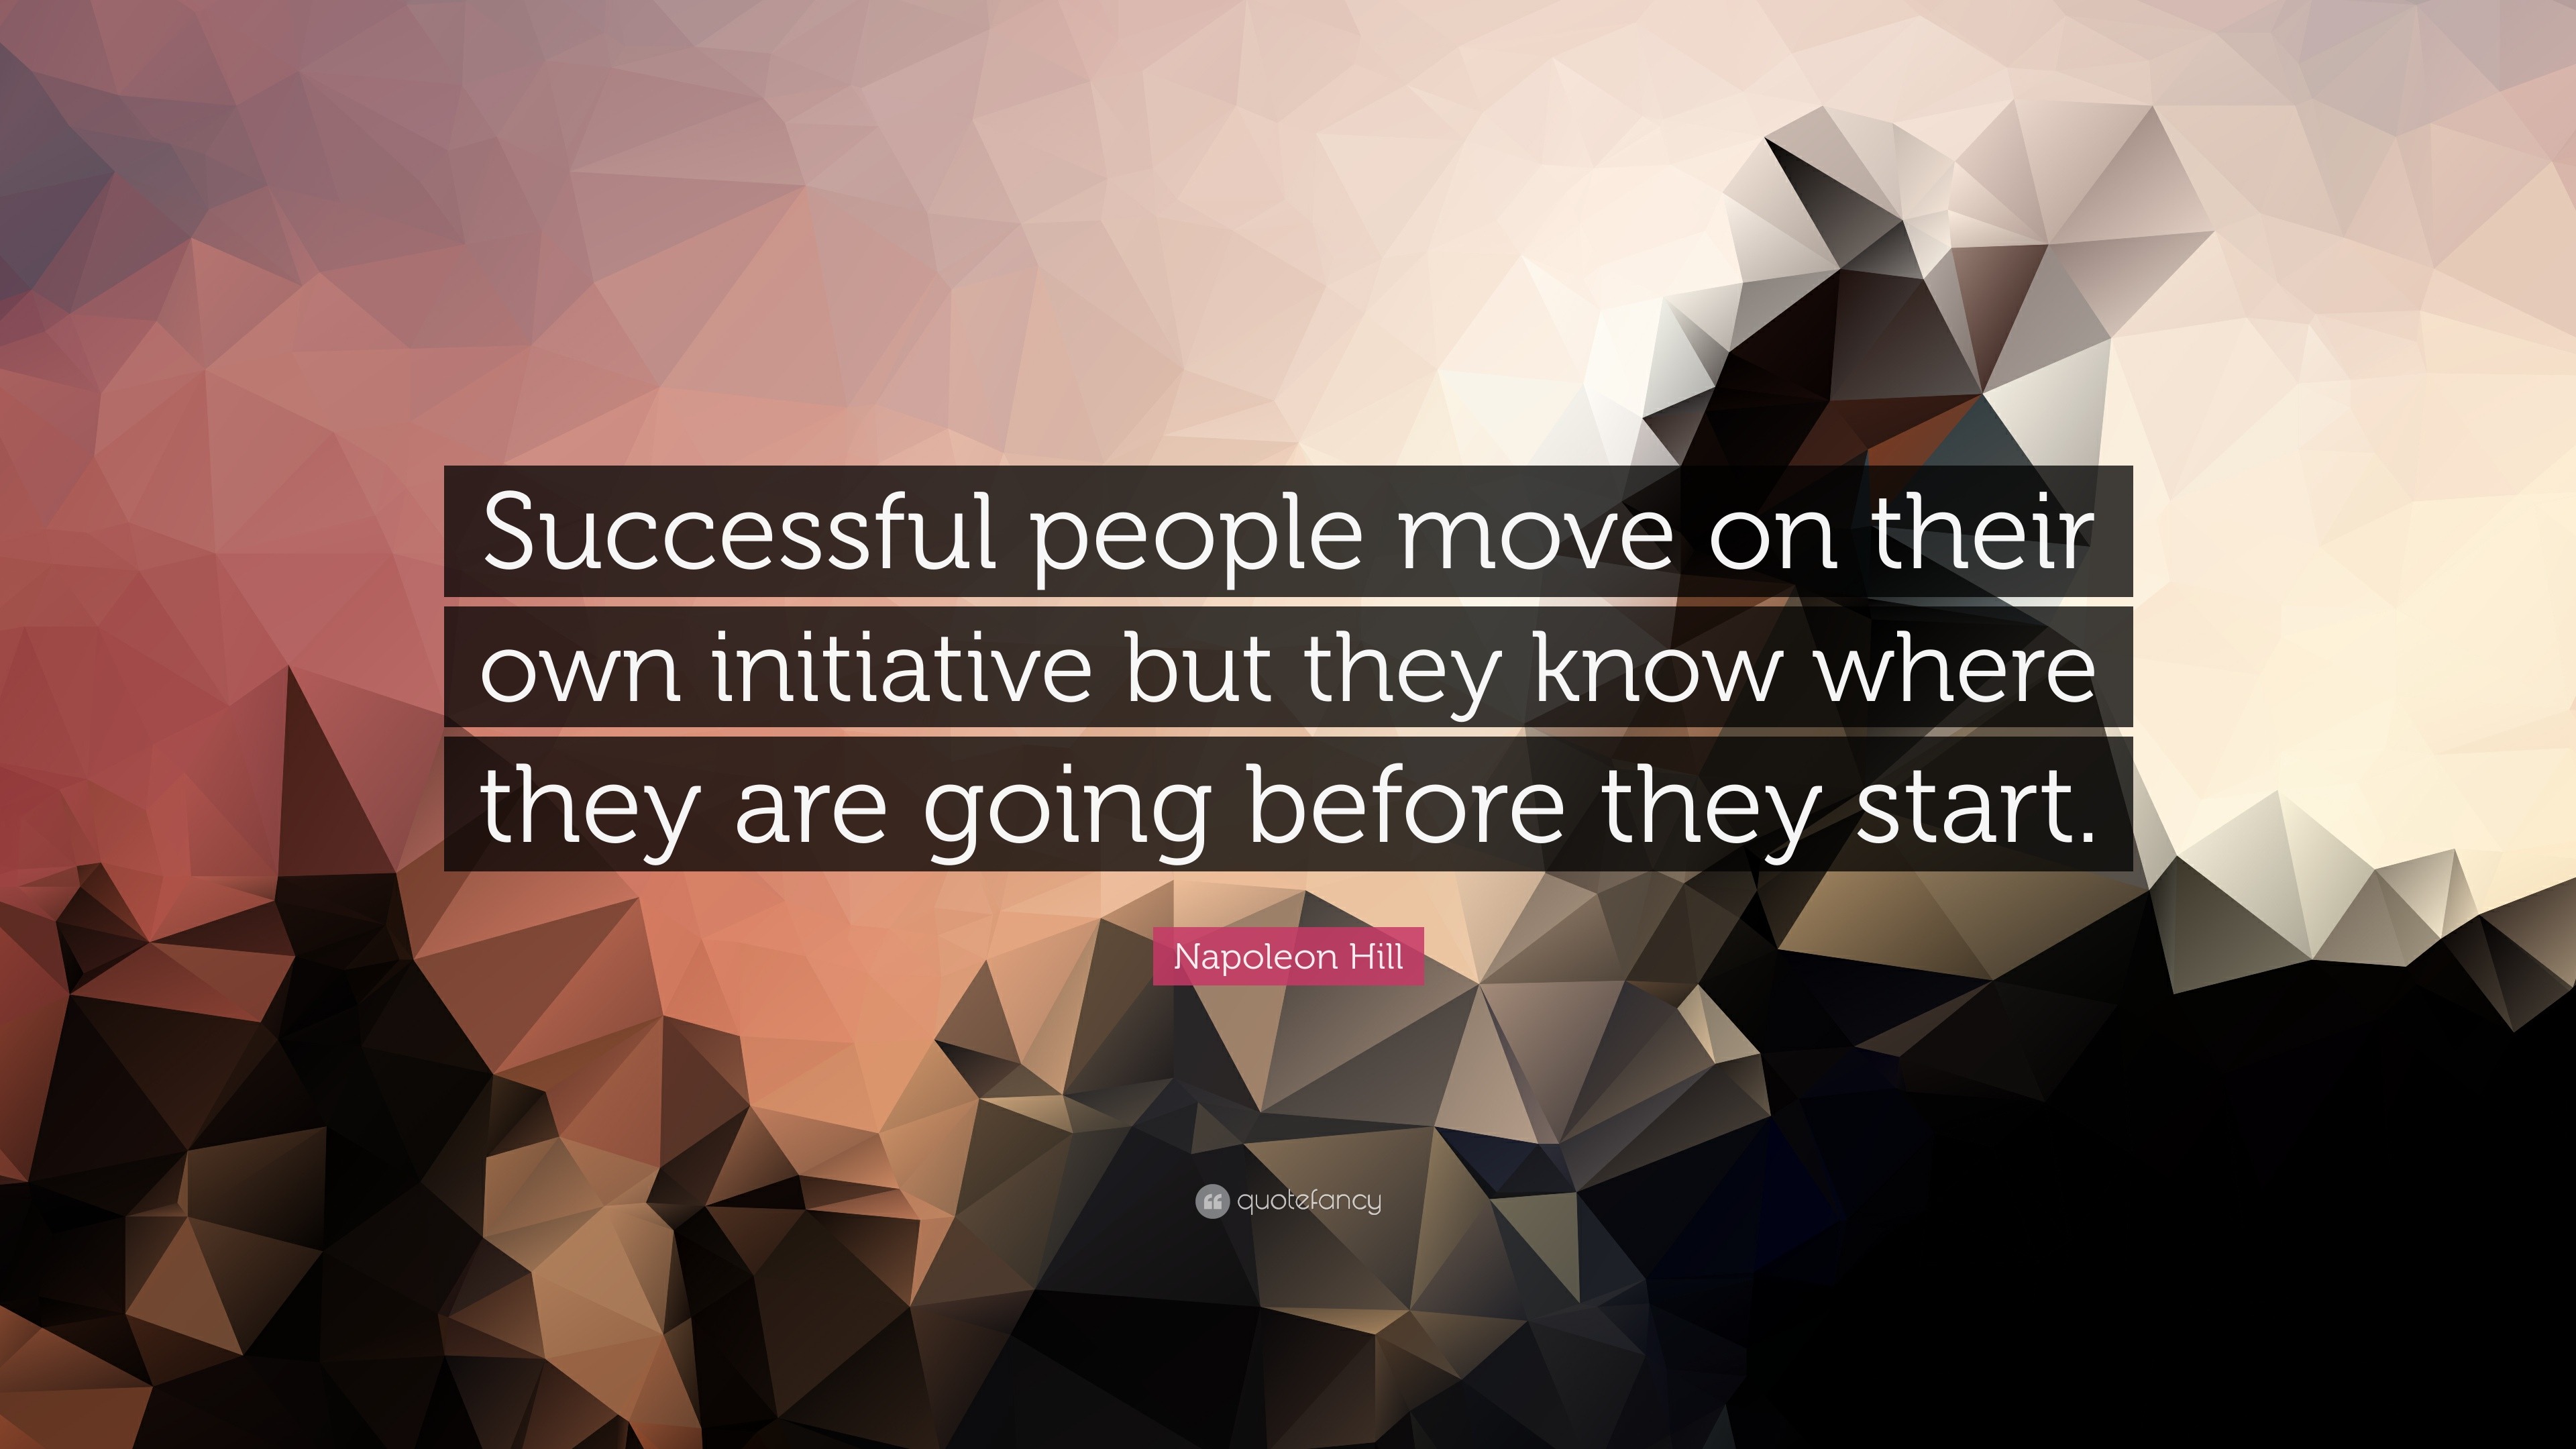 Napoleon Hill Quote: “Successful people move on their own initiative ...